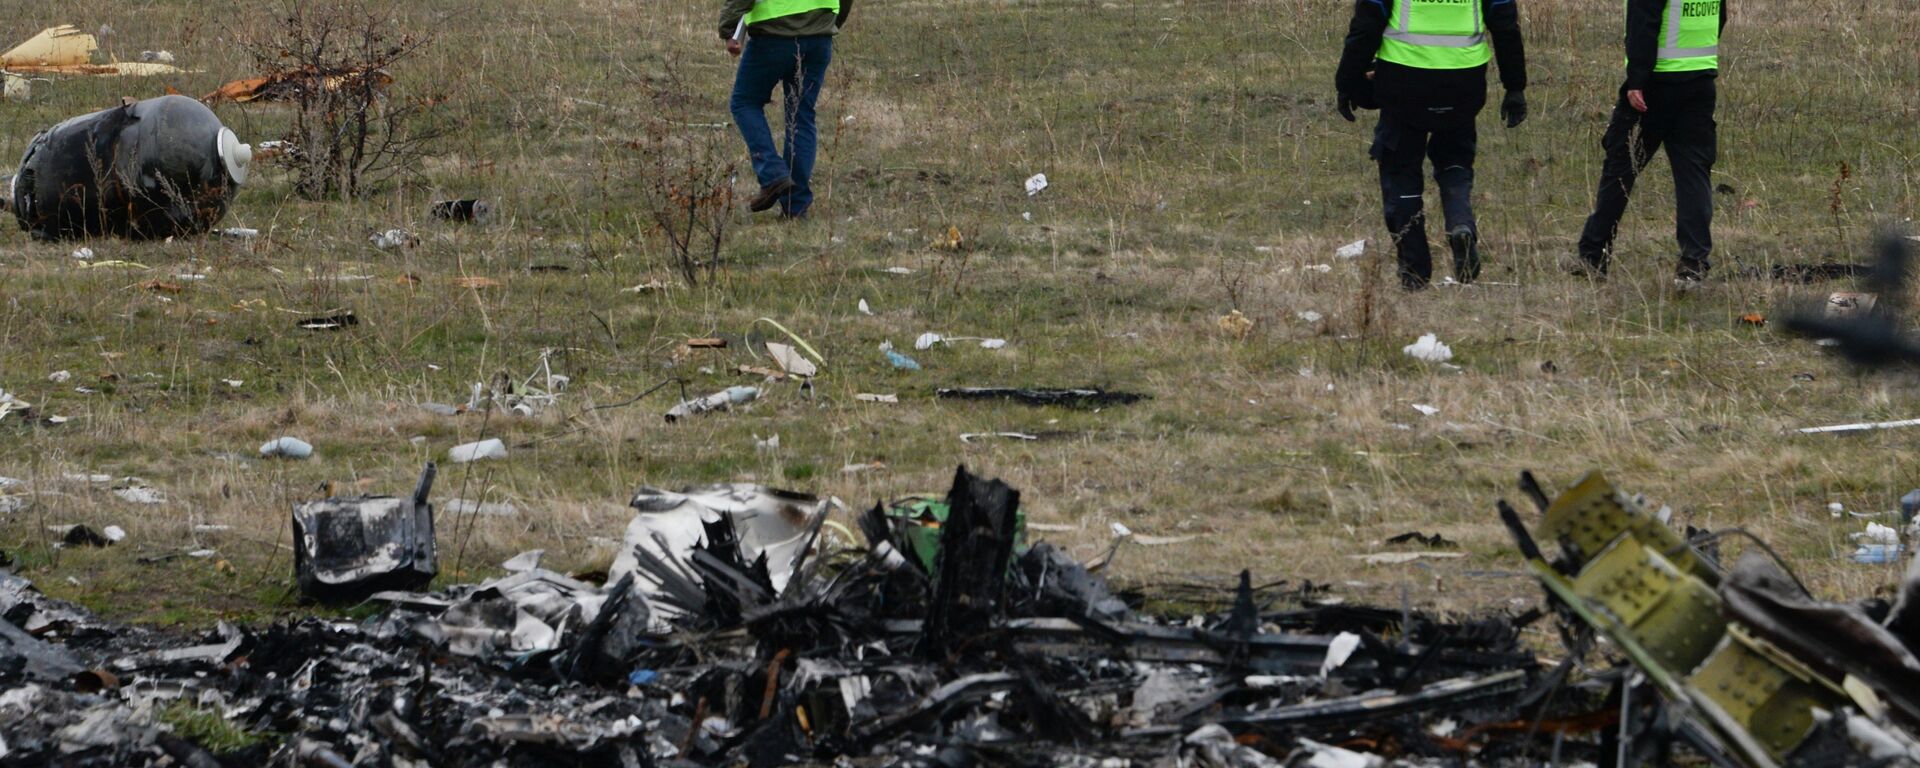 MH17 flight recovery team members examine one of the areas of the Malaysia Airlines Flight 17 plane crash in the village of Hrabove, Donetsk region, eastern Ukraine Tuesday, Nov. 11, 2014 - Sputnik International, 1920, 17.11.2022